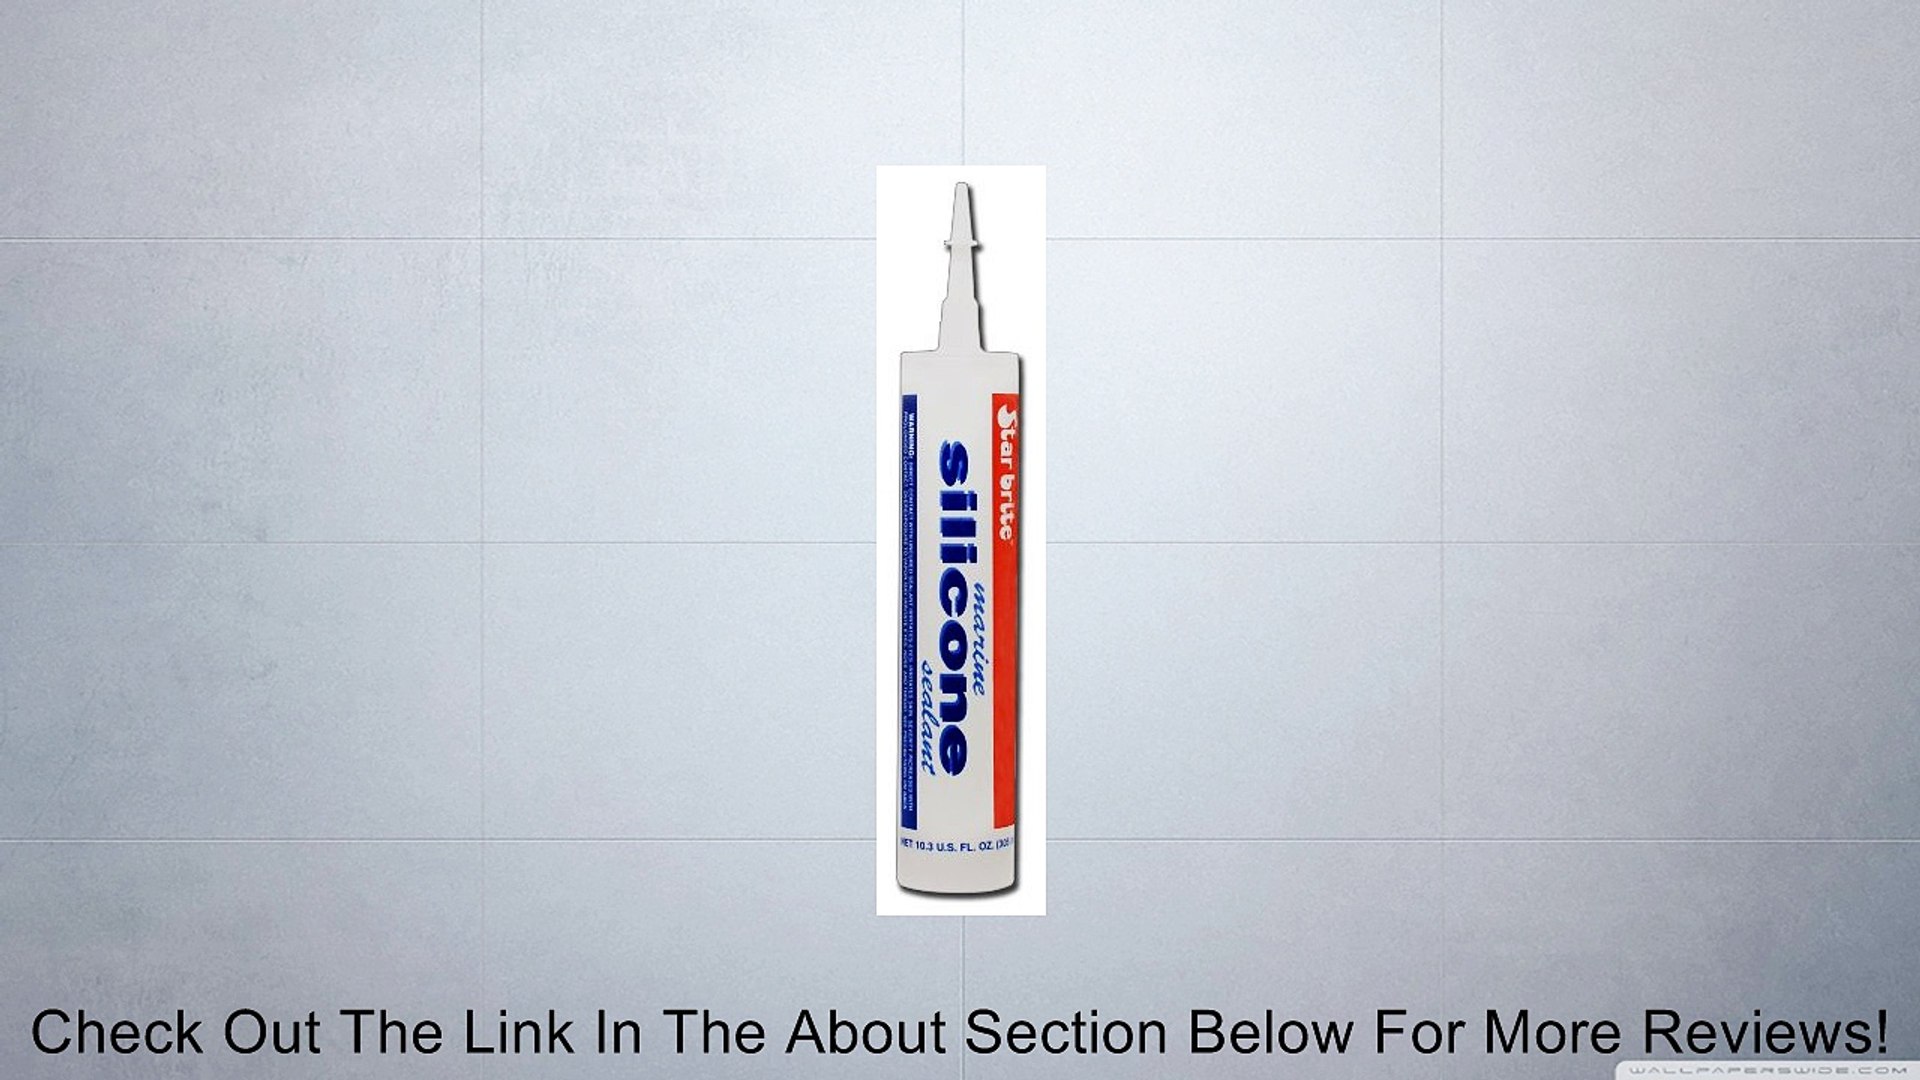 Star brite Silicone Adhesive Marine Sealant Review - video Dailymotion